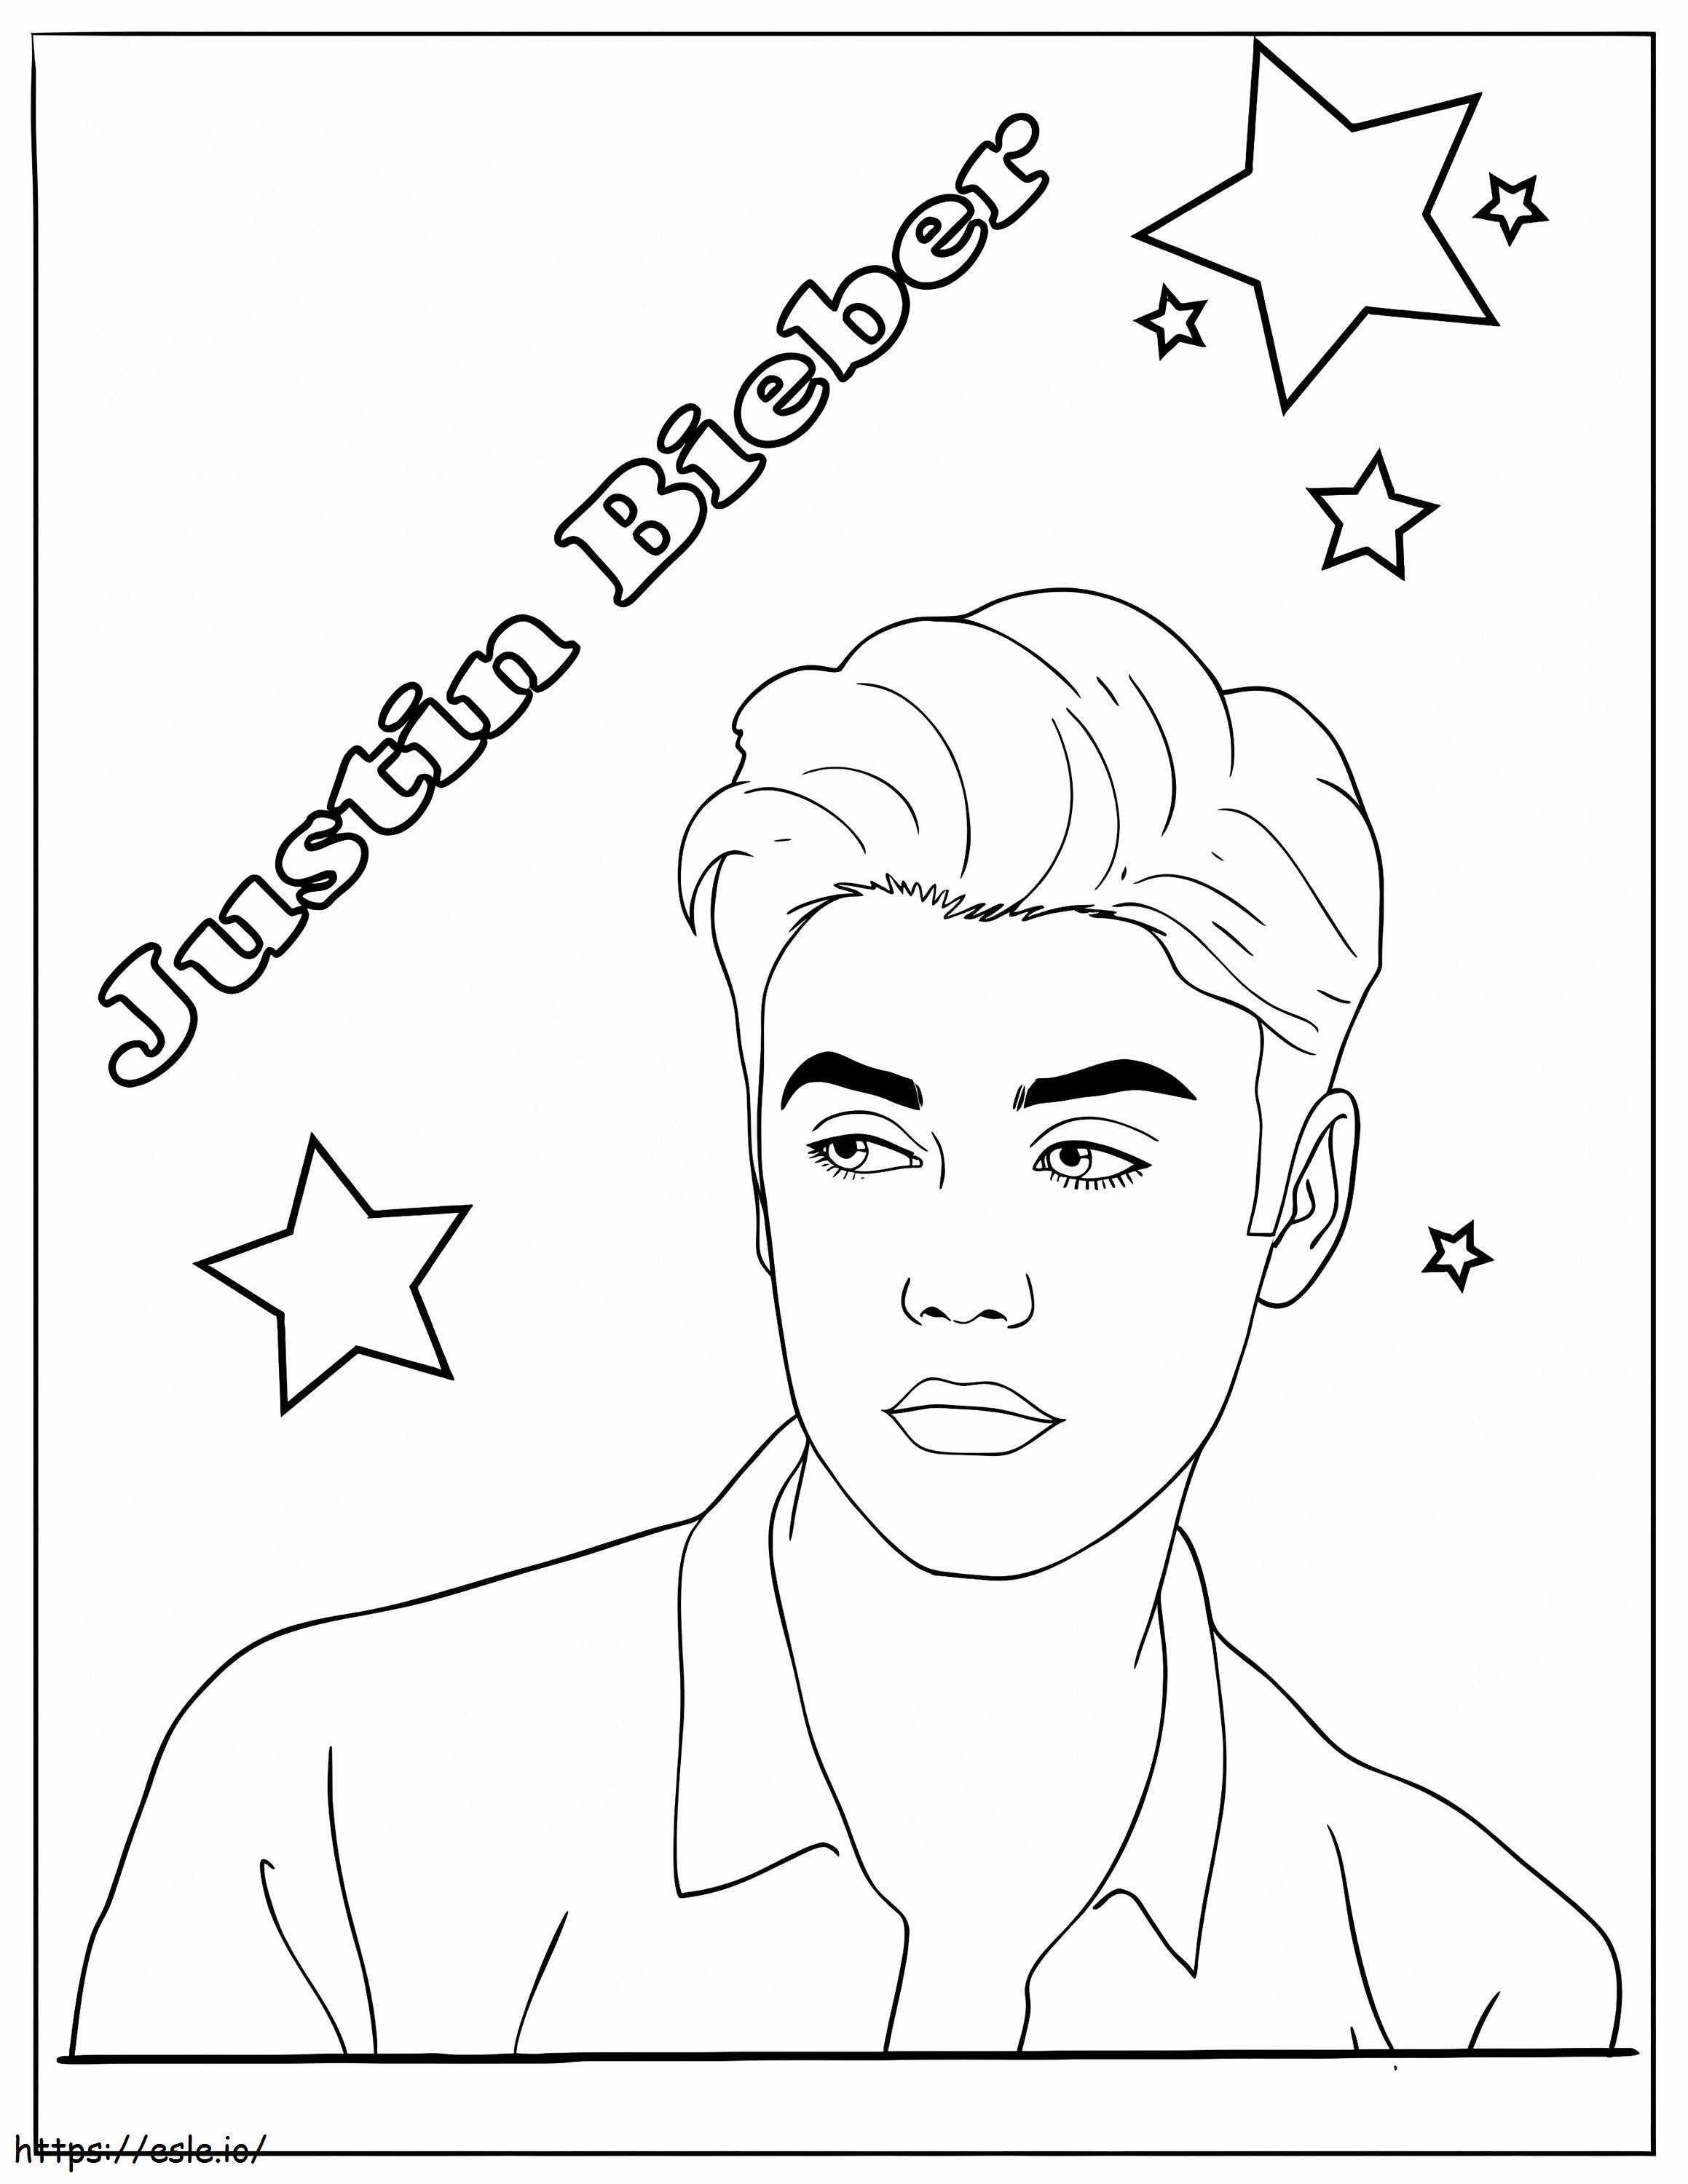 Justin Bieber With Star coloring page